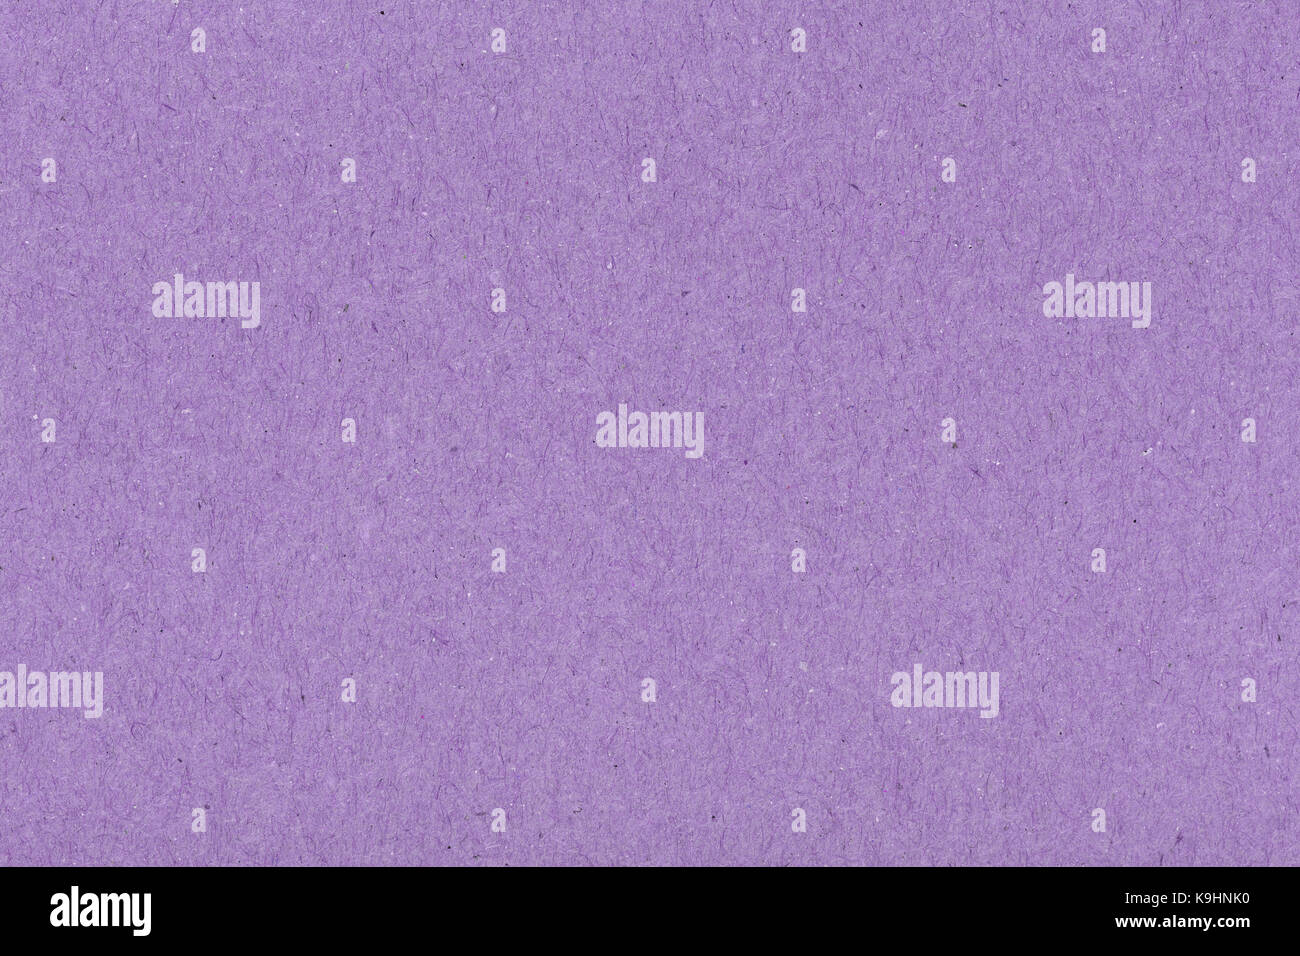 Natural purple recycled paper texture background. Paper texture. Stock Photo